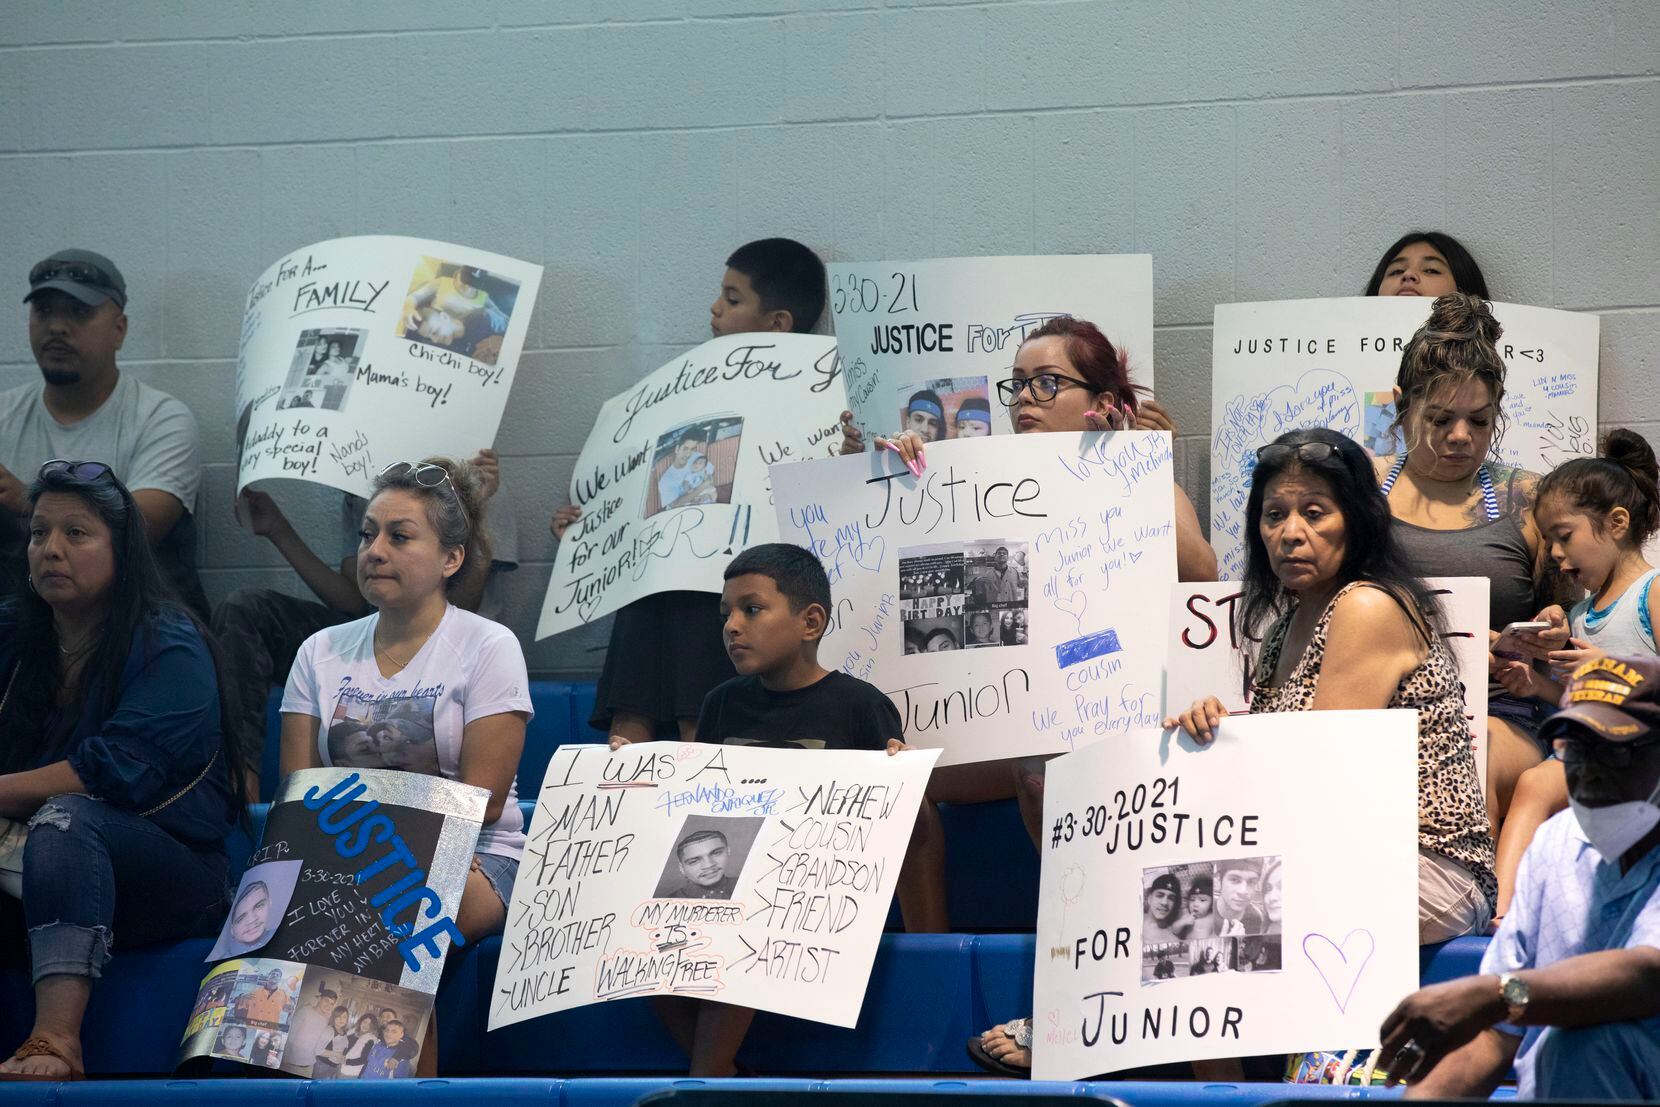 A large group of relatives and supporters held signs seeking justice for Fernando Enriquez Jr.